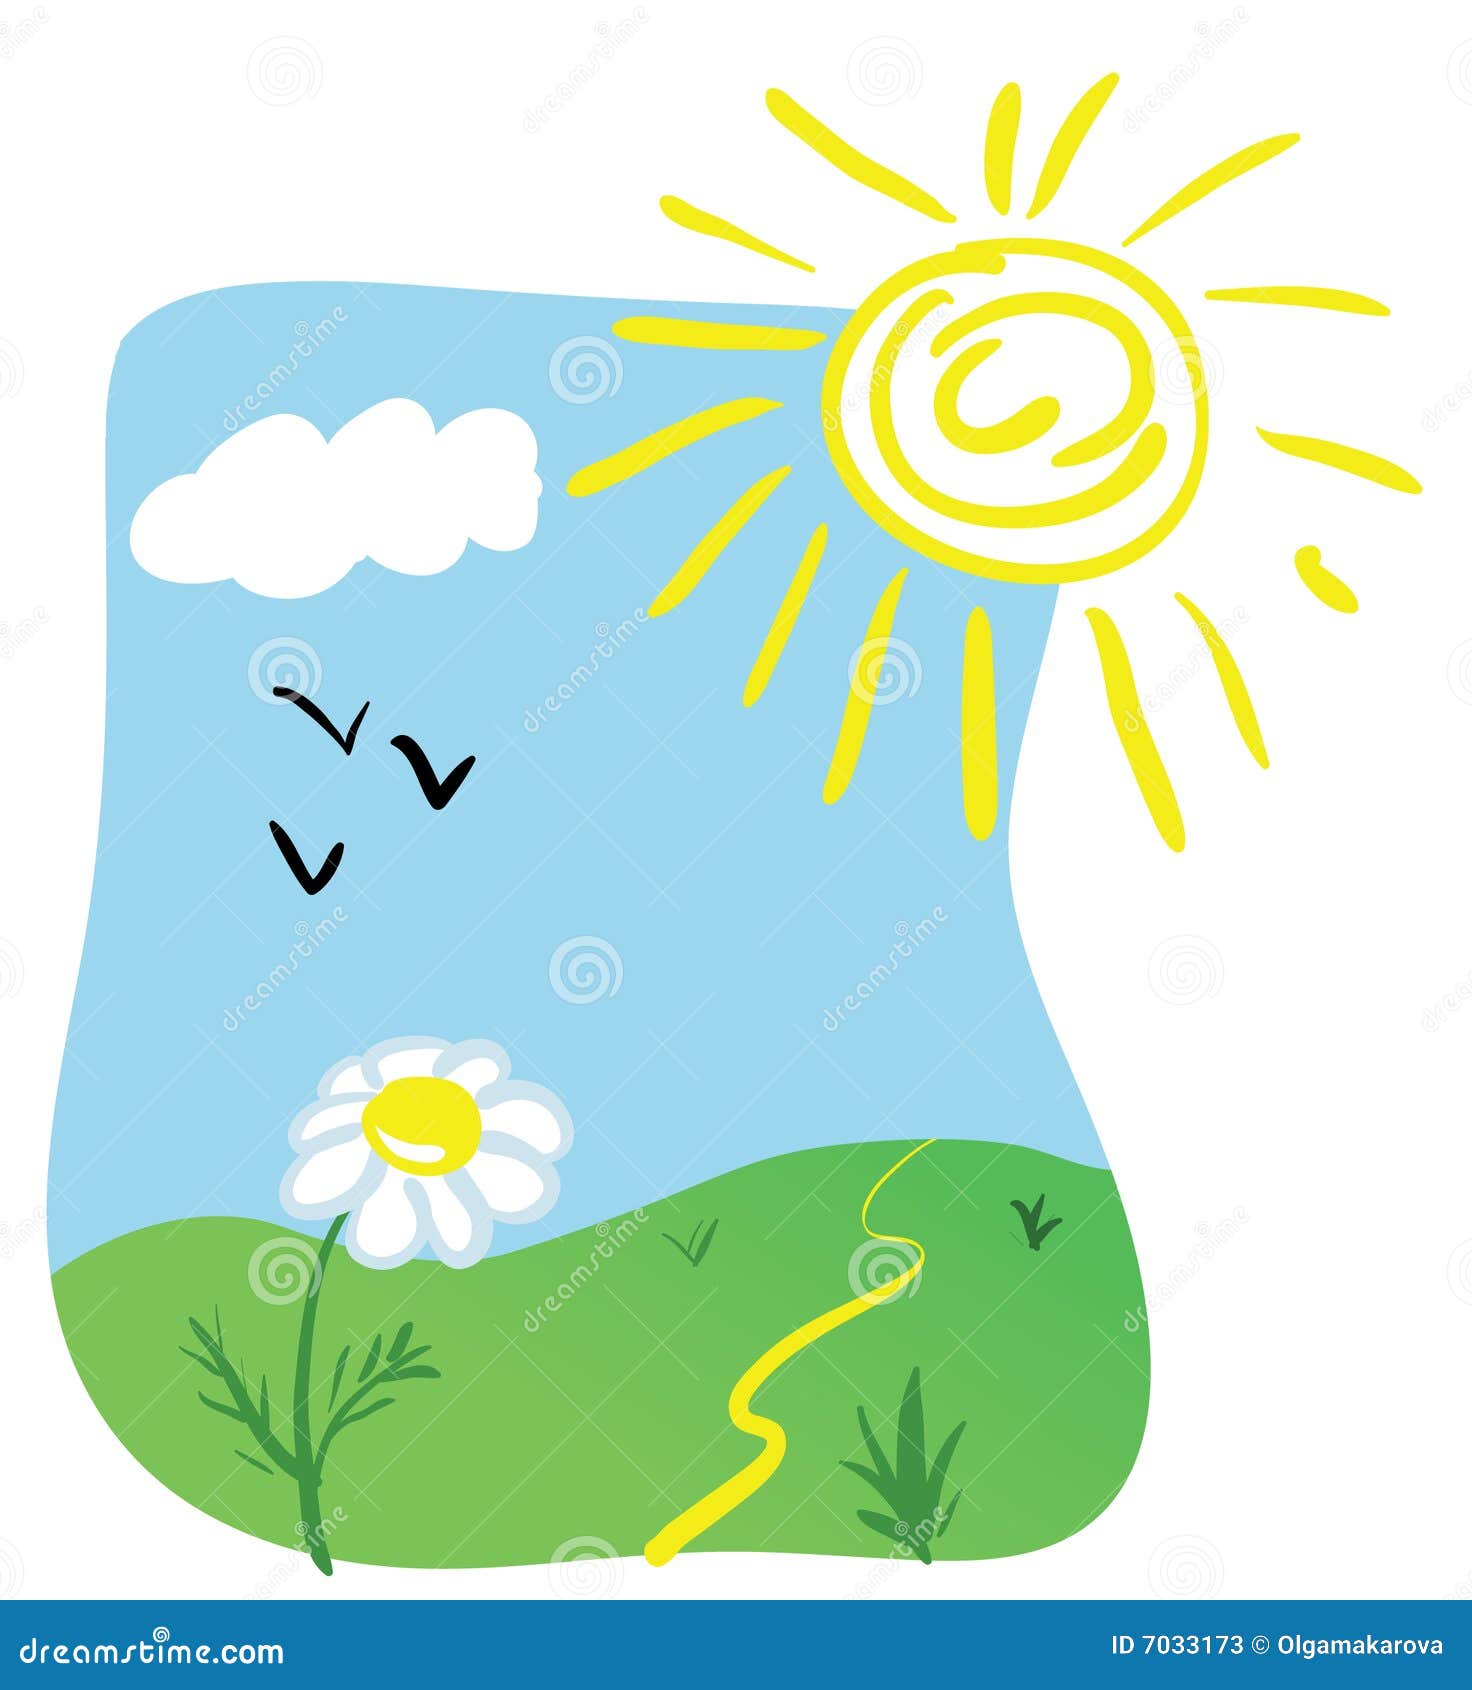 animated clipart of spring - photo #35